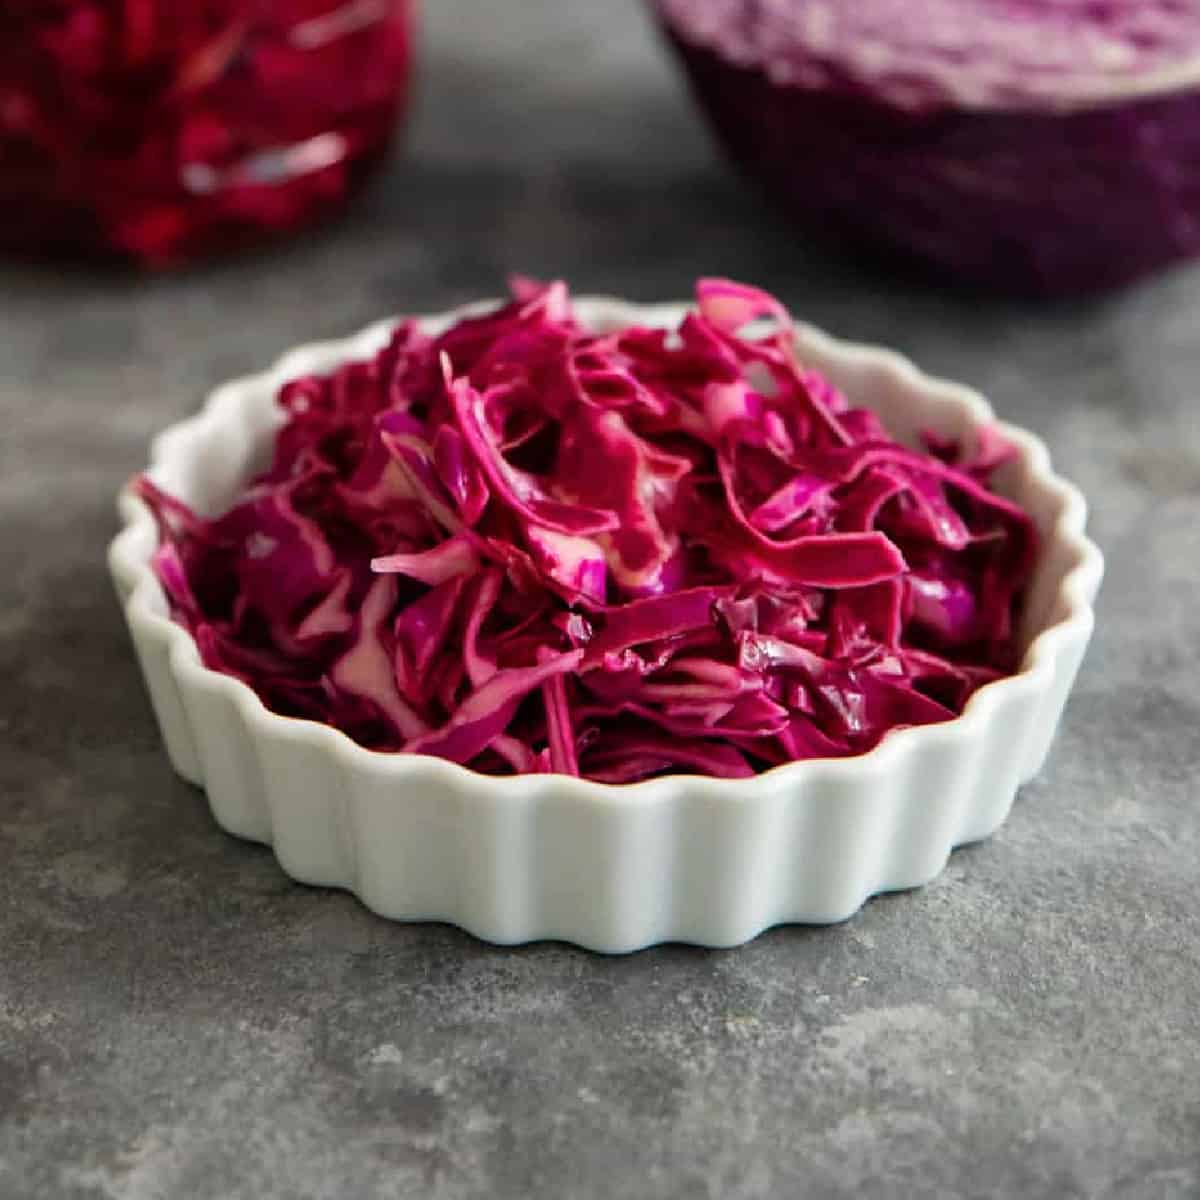 How To Cut Cabbage Recipe - Love and Lemons